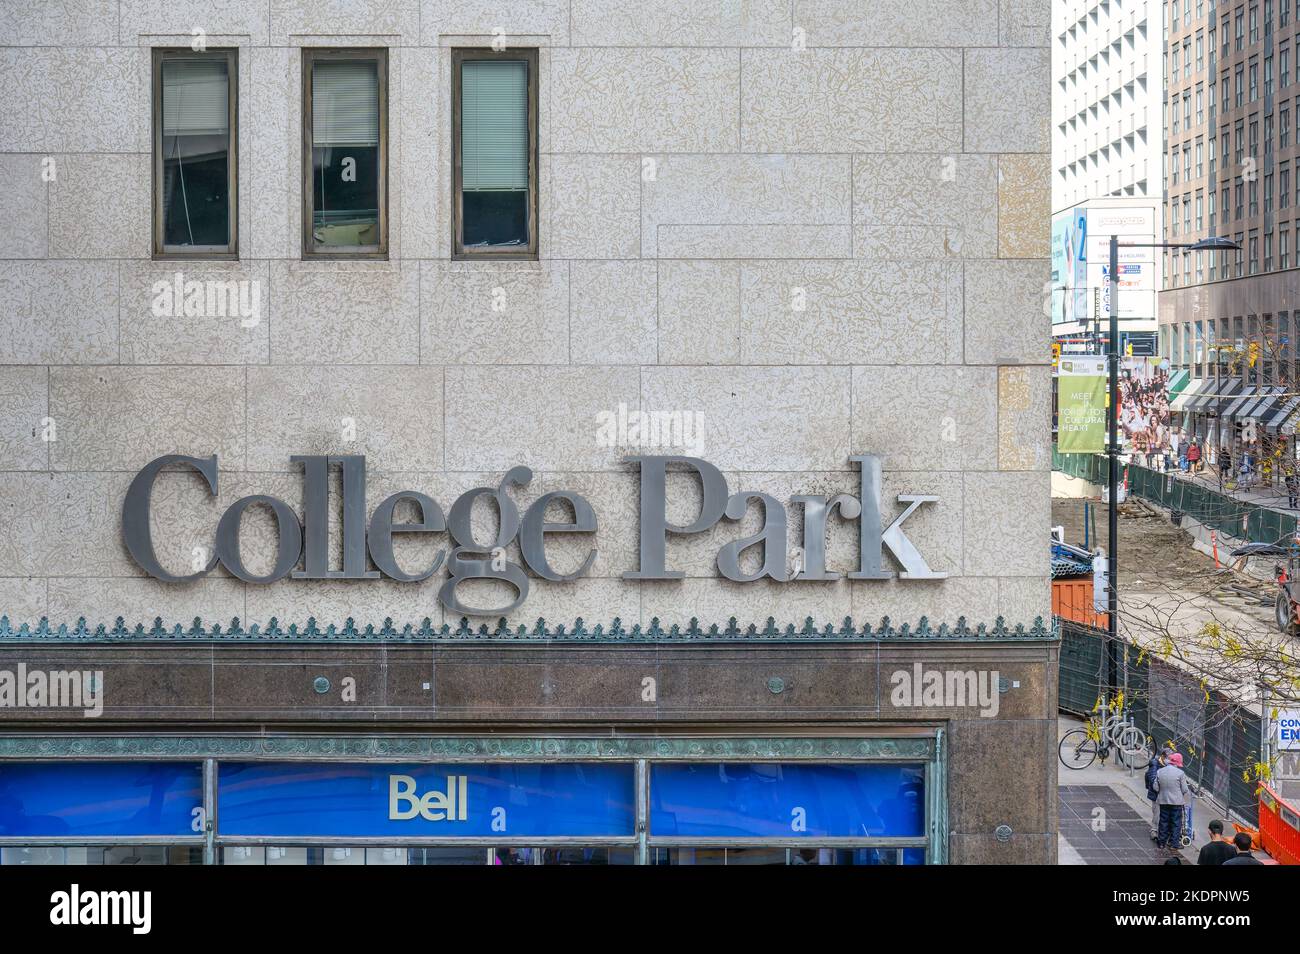 Toronto, Canada - November 5, 2022: Sign of the College Park building in Yonge St. The structure is part of the city heritage Stock Photo